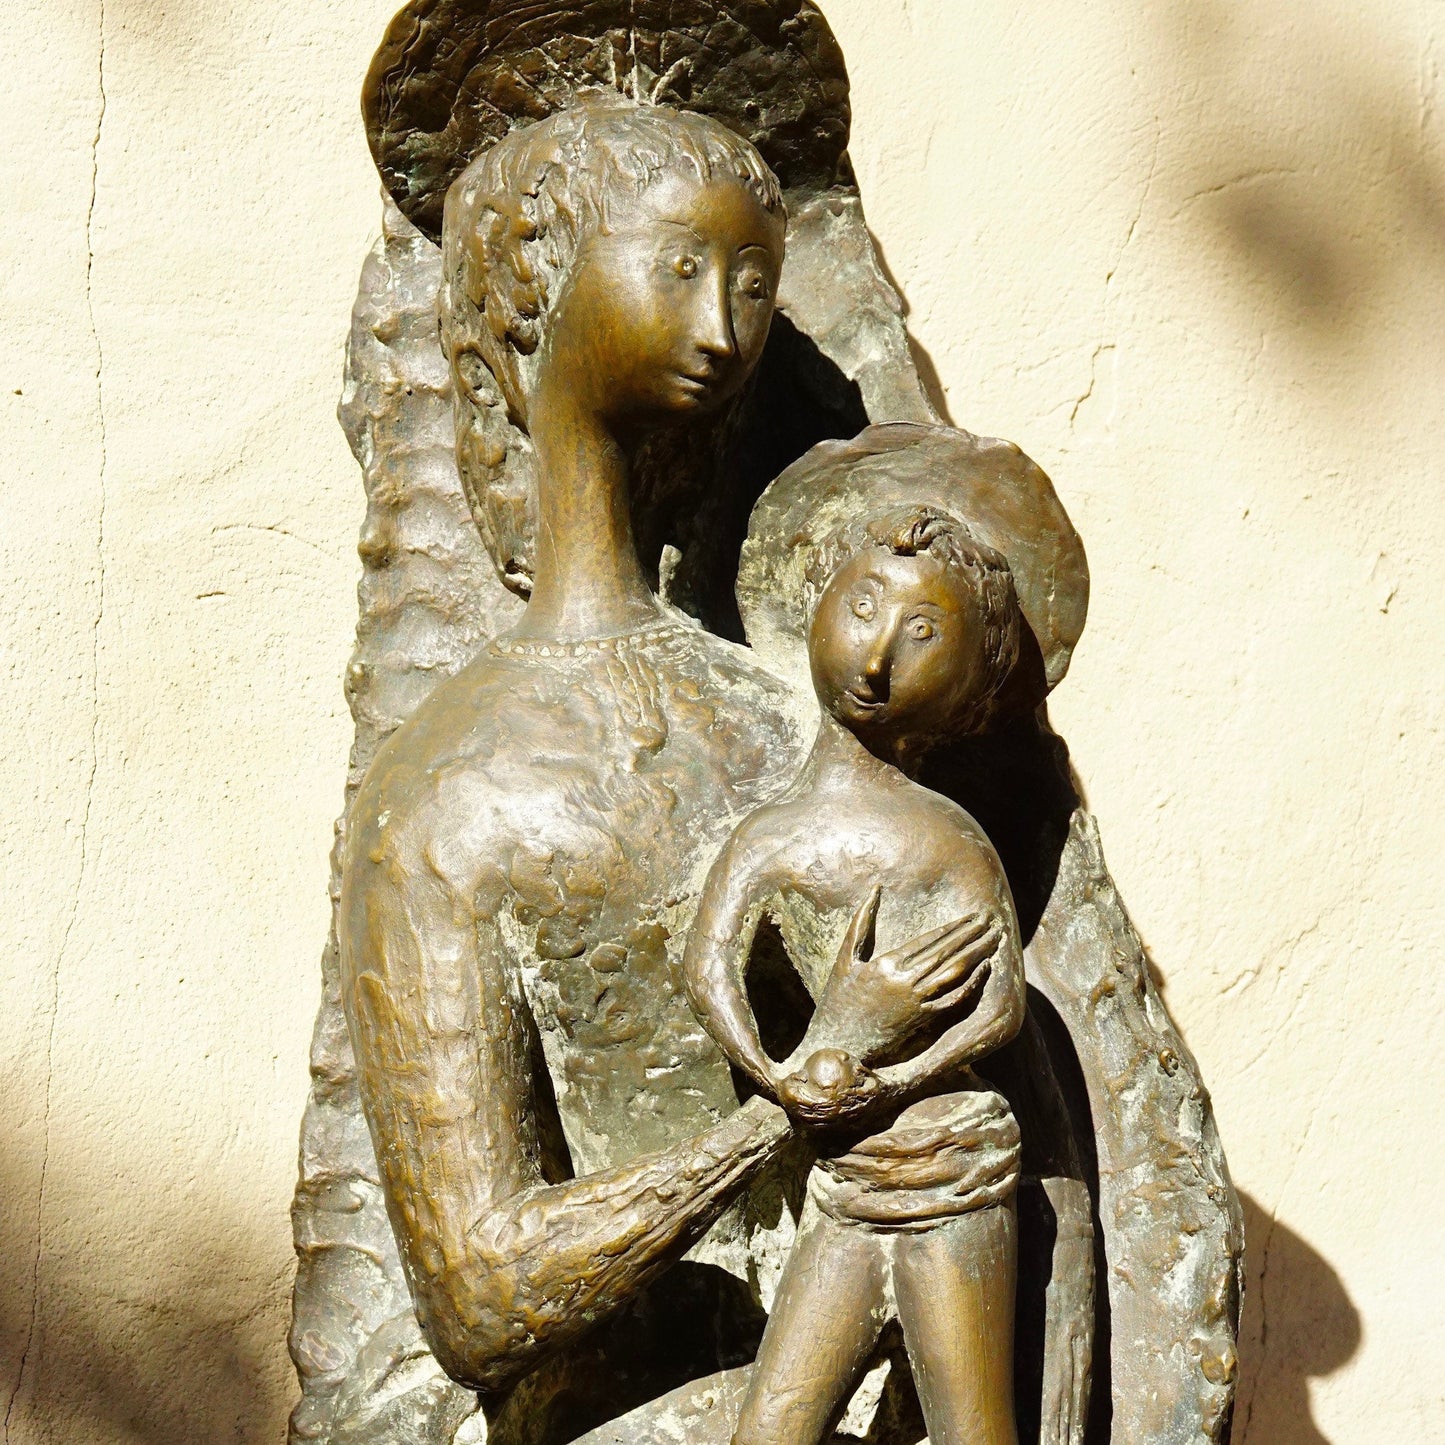 Vintage signed Toni Furlan bronze sculpture of a stylized Mother Mary holding Baby Jesus, an abstract modernist Italian religious statue measuring 36 inches tall.